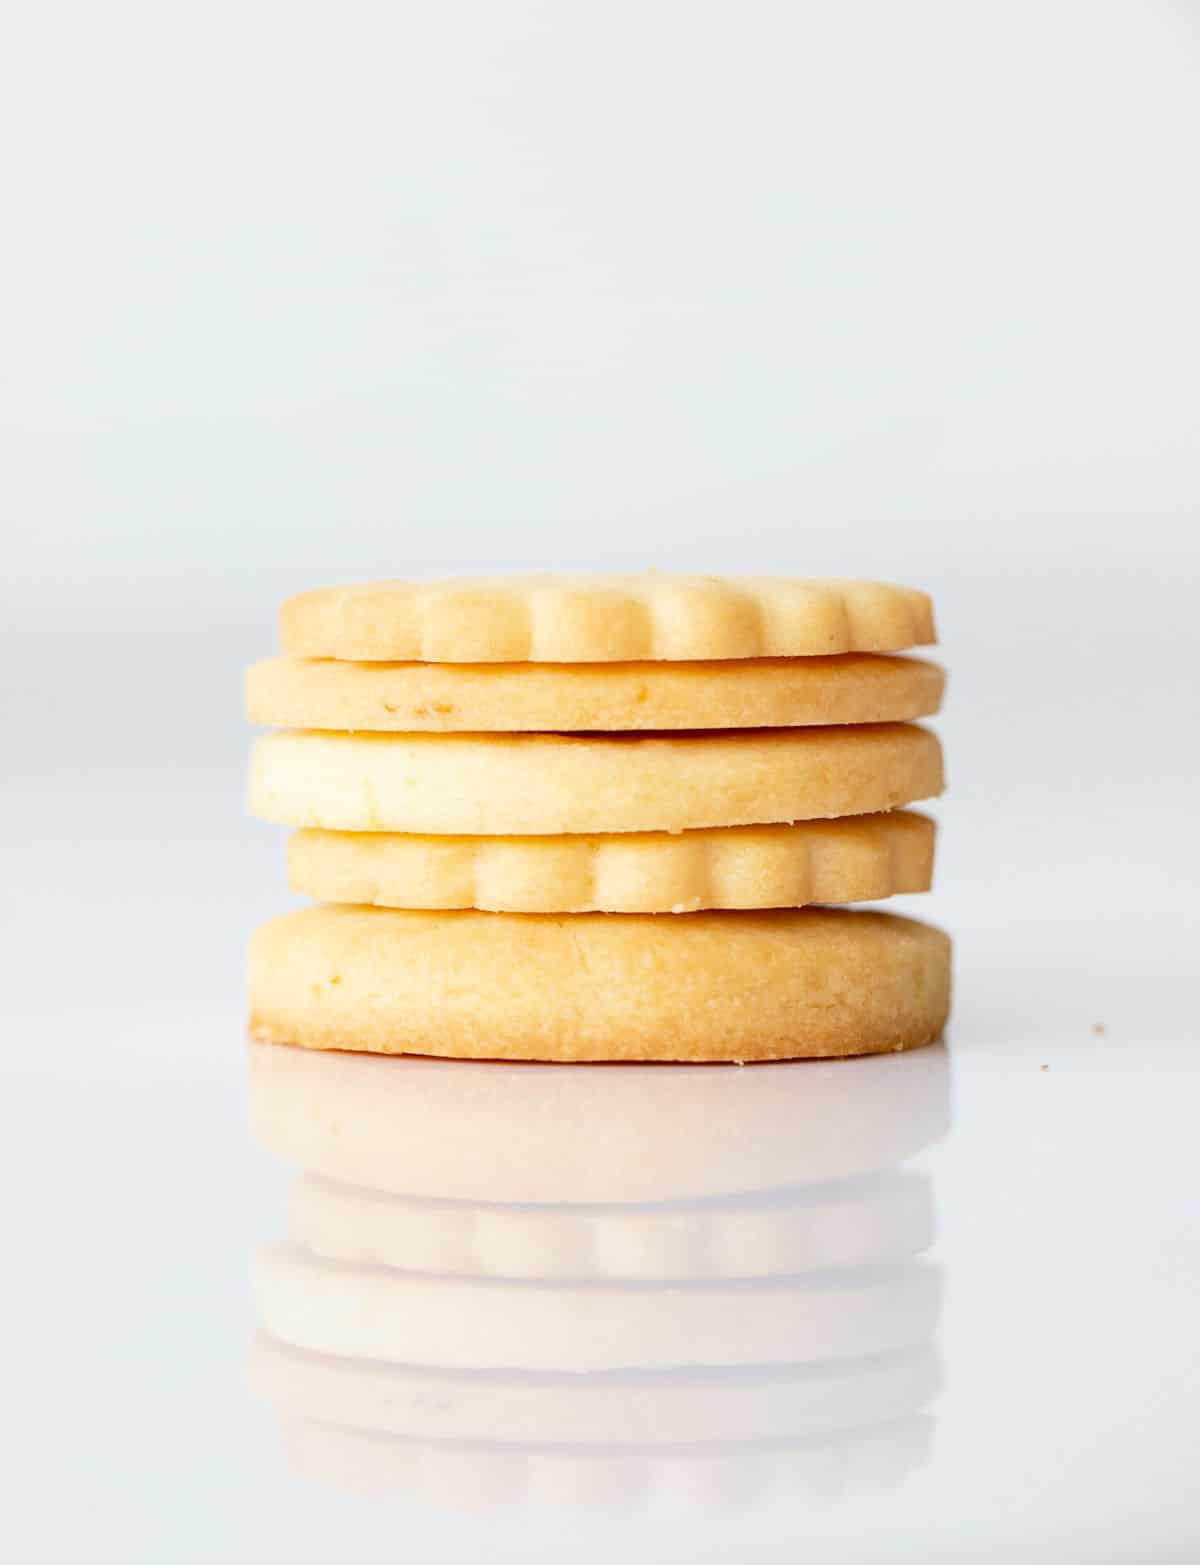 Several round cookies stacked with white marble surface and white background